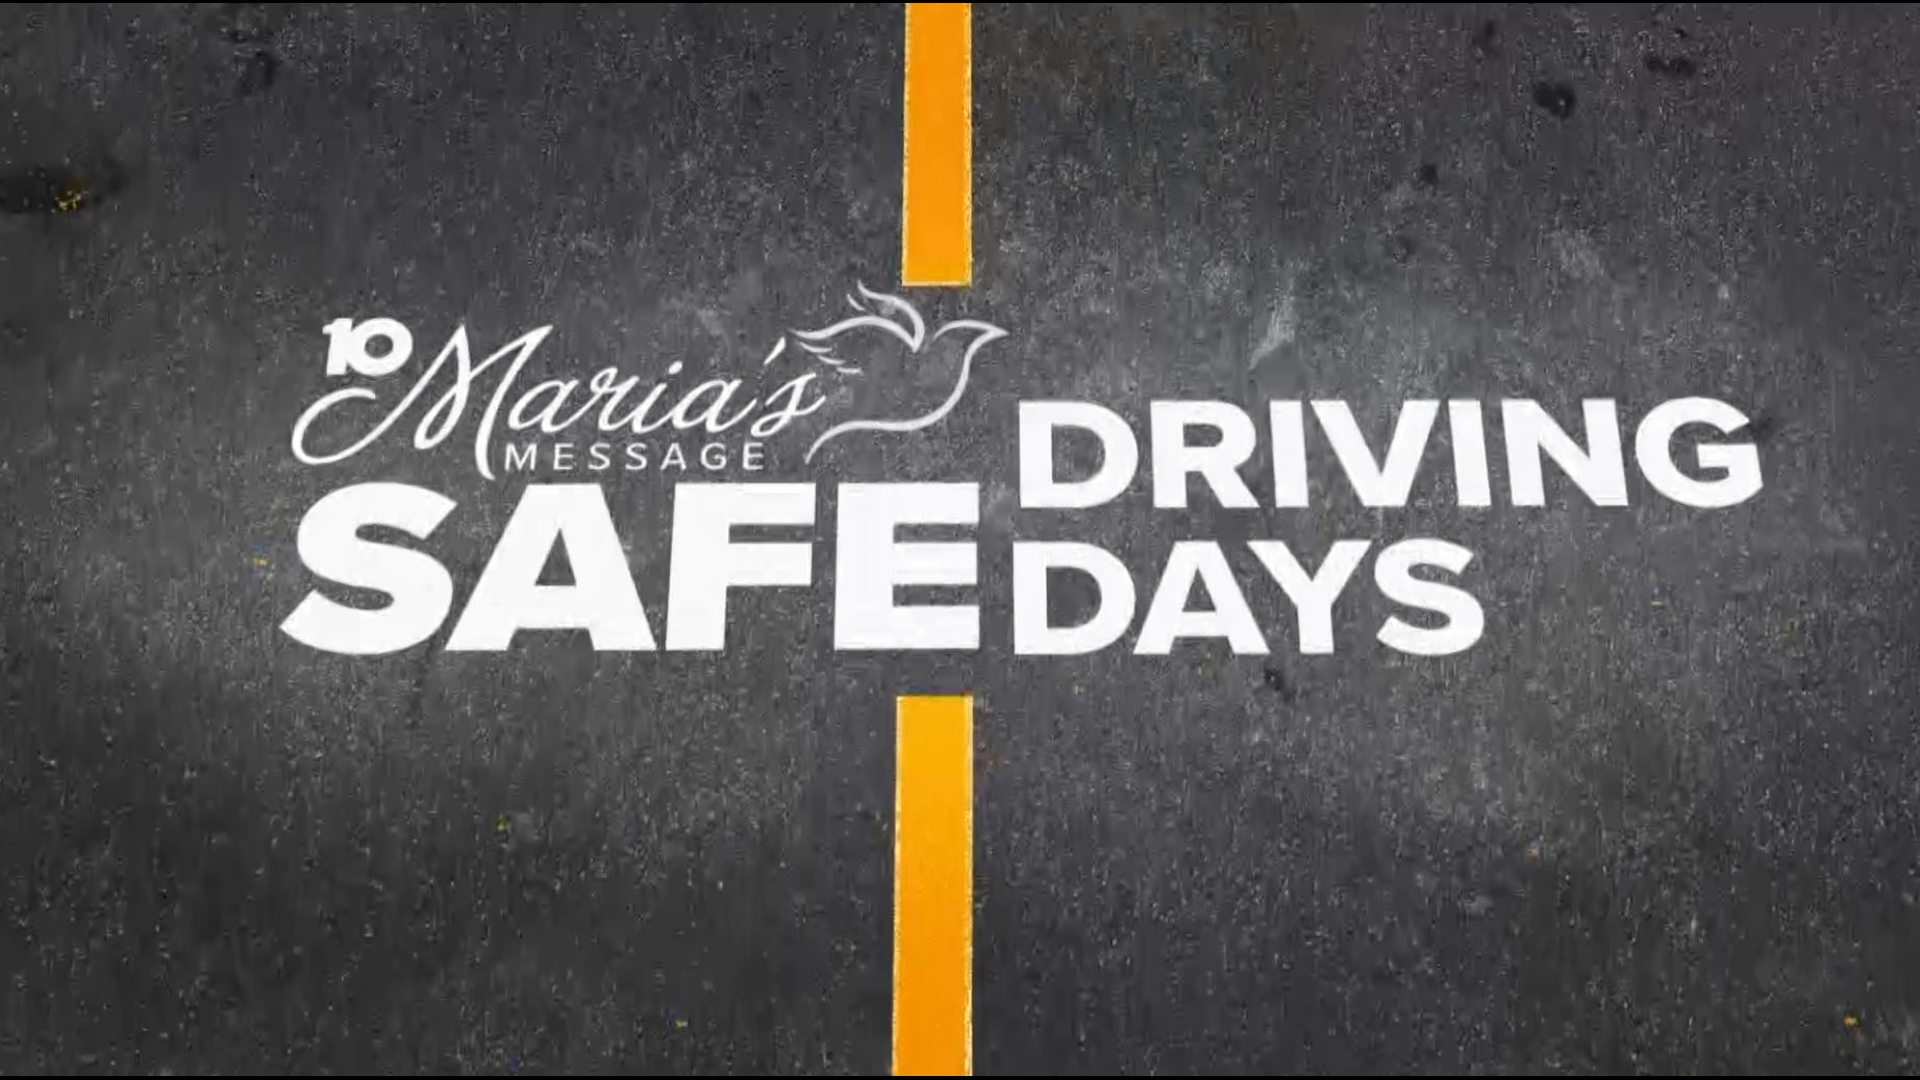 Professional drivers offer free defensive driving courses during three one-day events in the summer months: June 15, July 20, and Aug. 17.